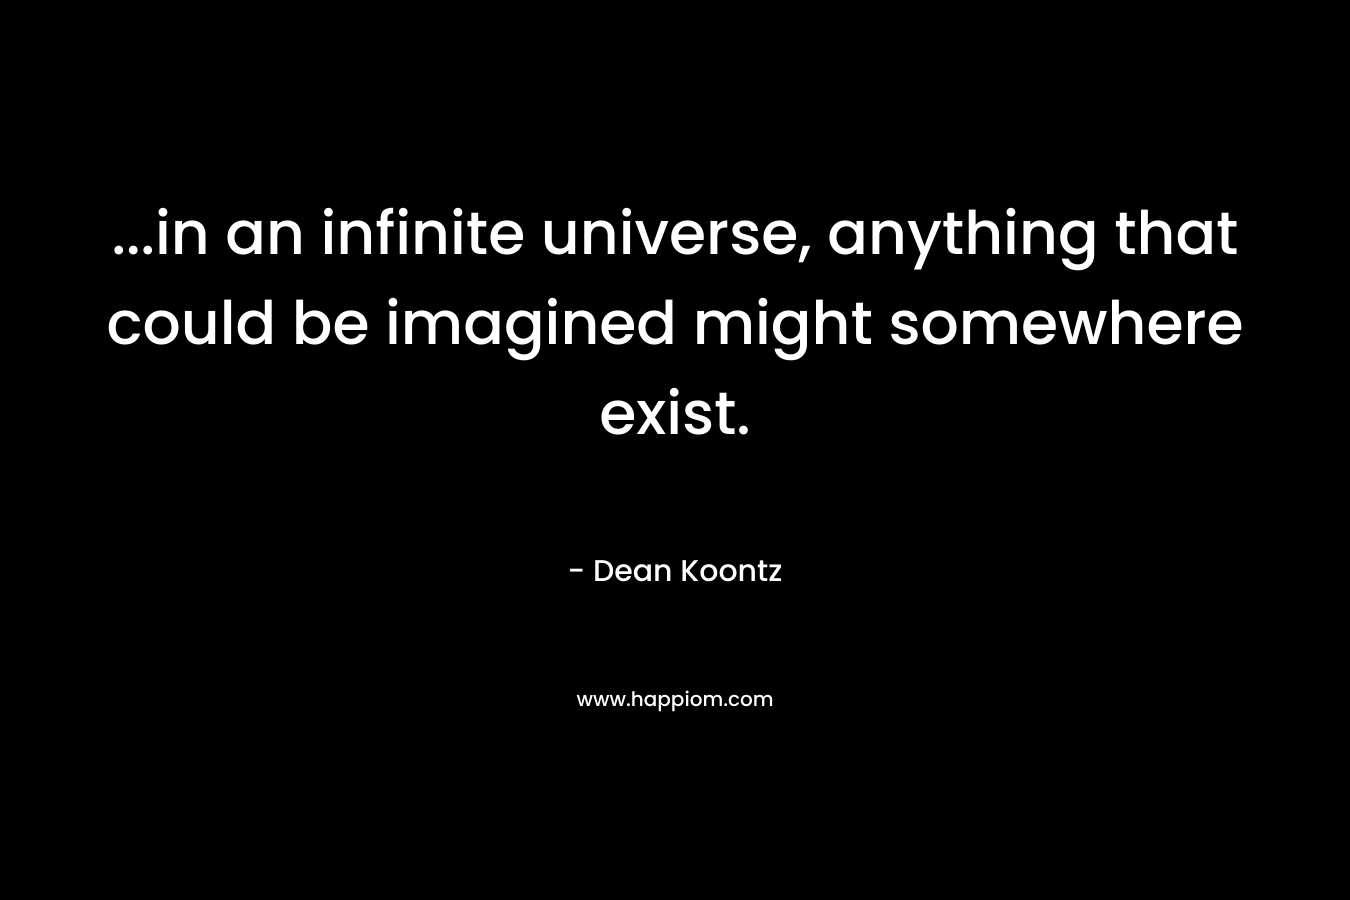 ...in an infinite universe, anything that could be imagined might somewhere exist.